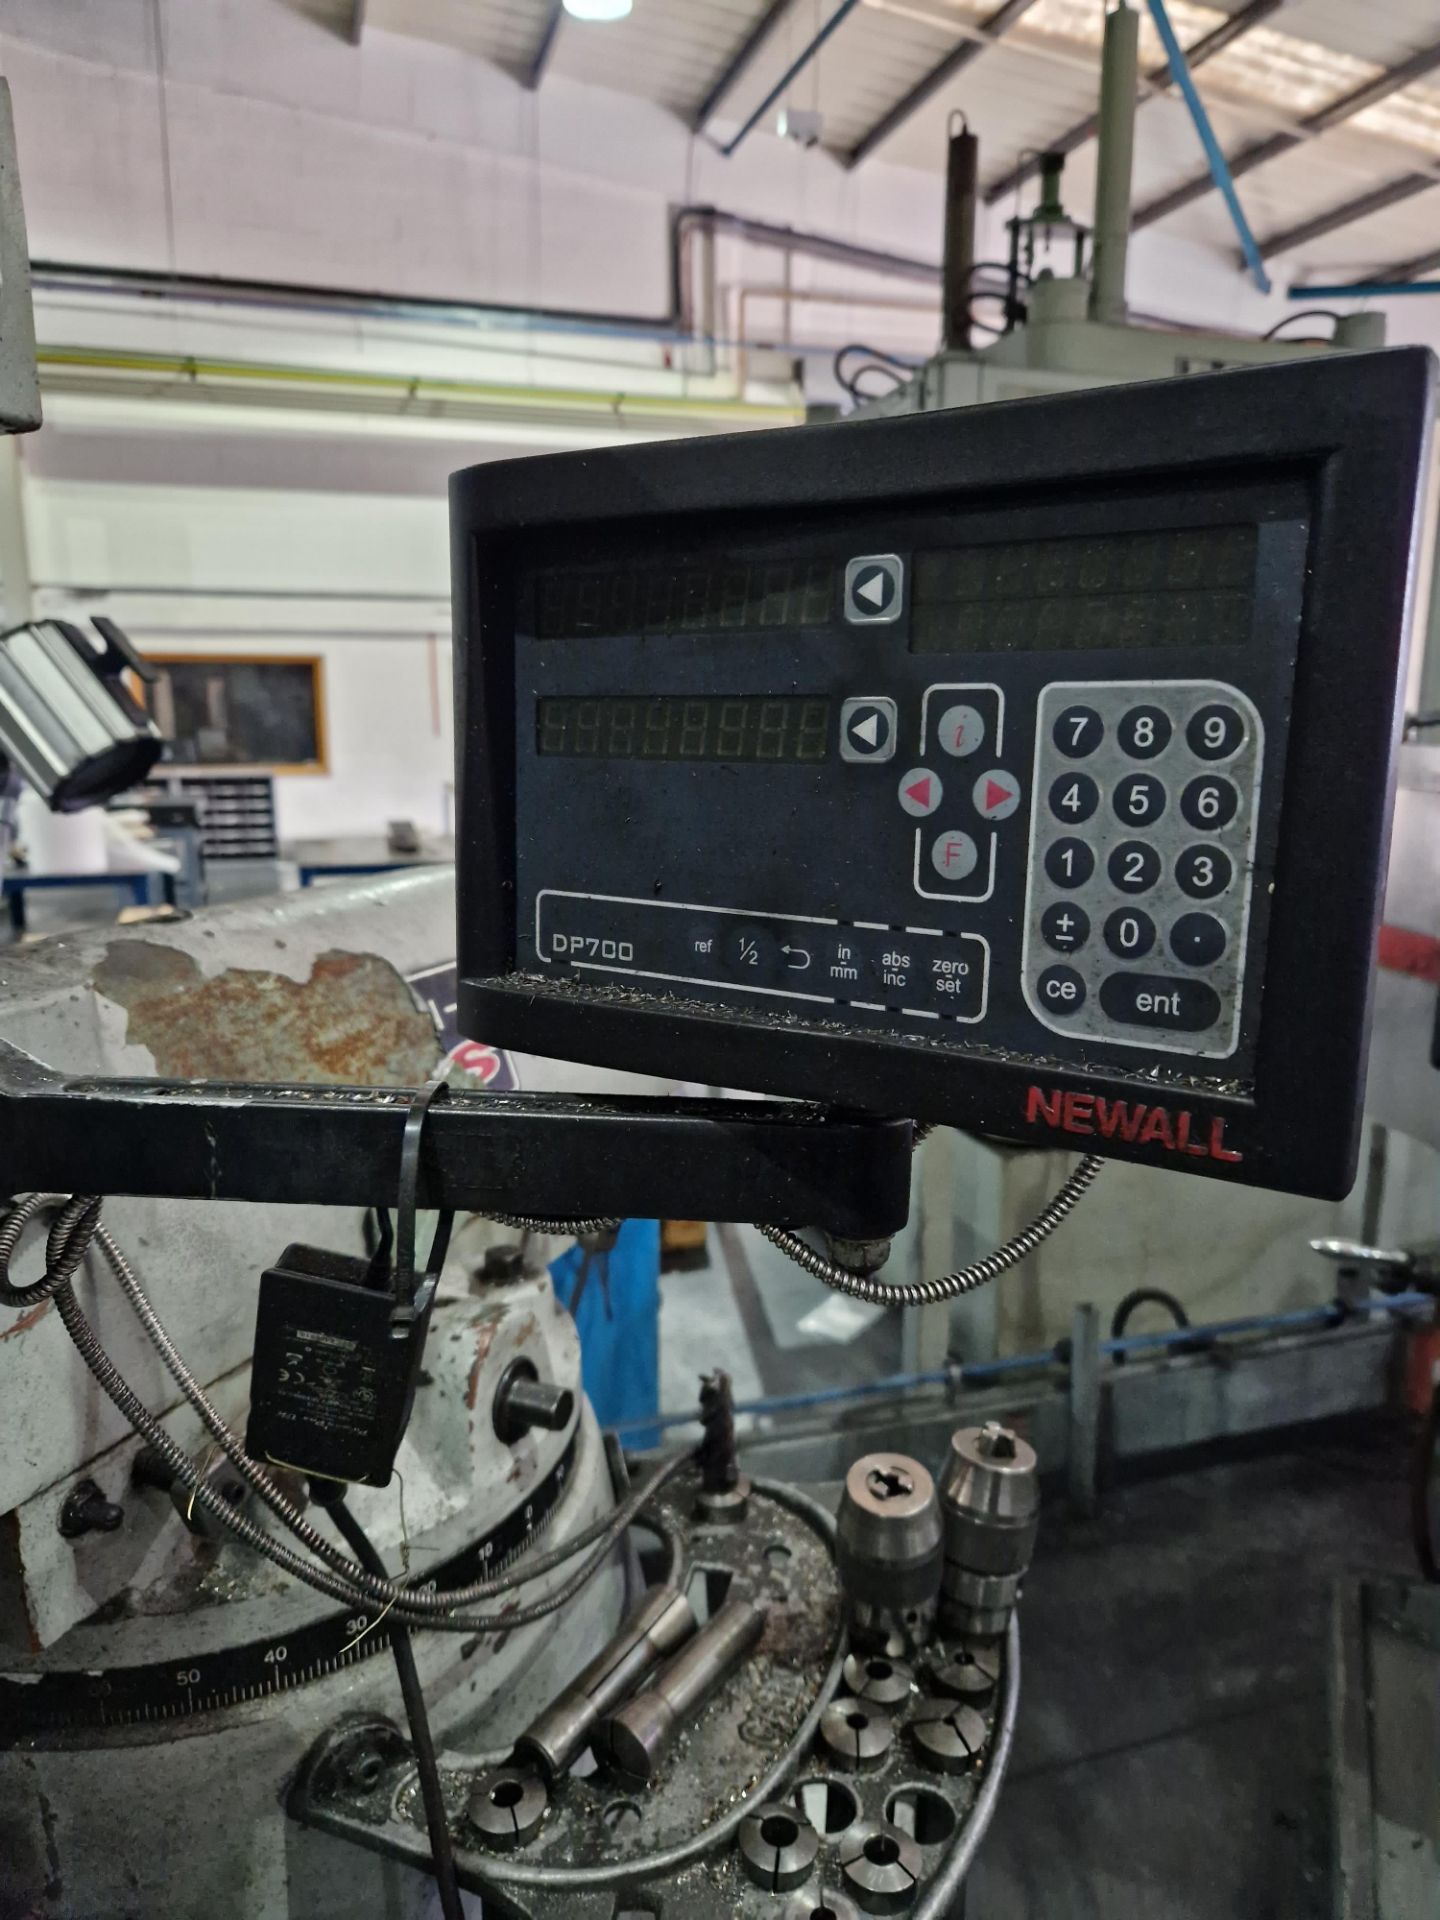 LION 2VS Universal Head Milling Machine with NEWALL DP 700 Digital Read Out, c/w 2 Tool Holders - Image 6 of 8